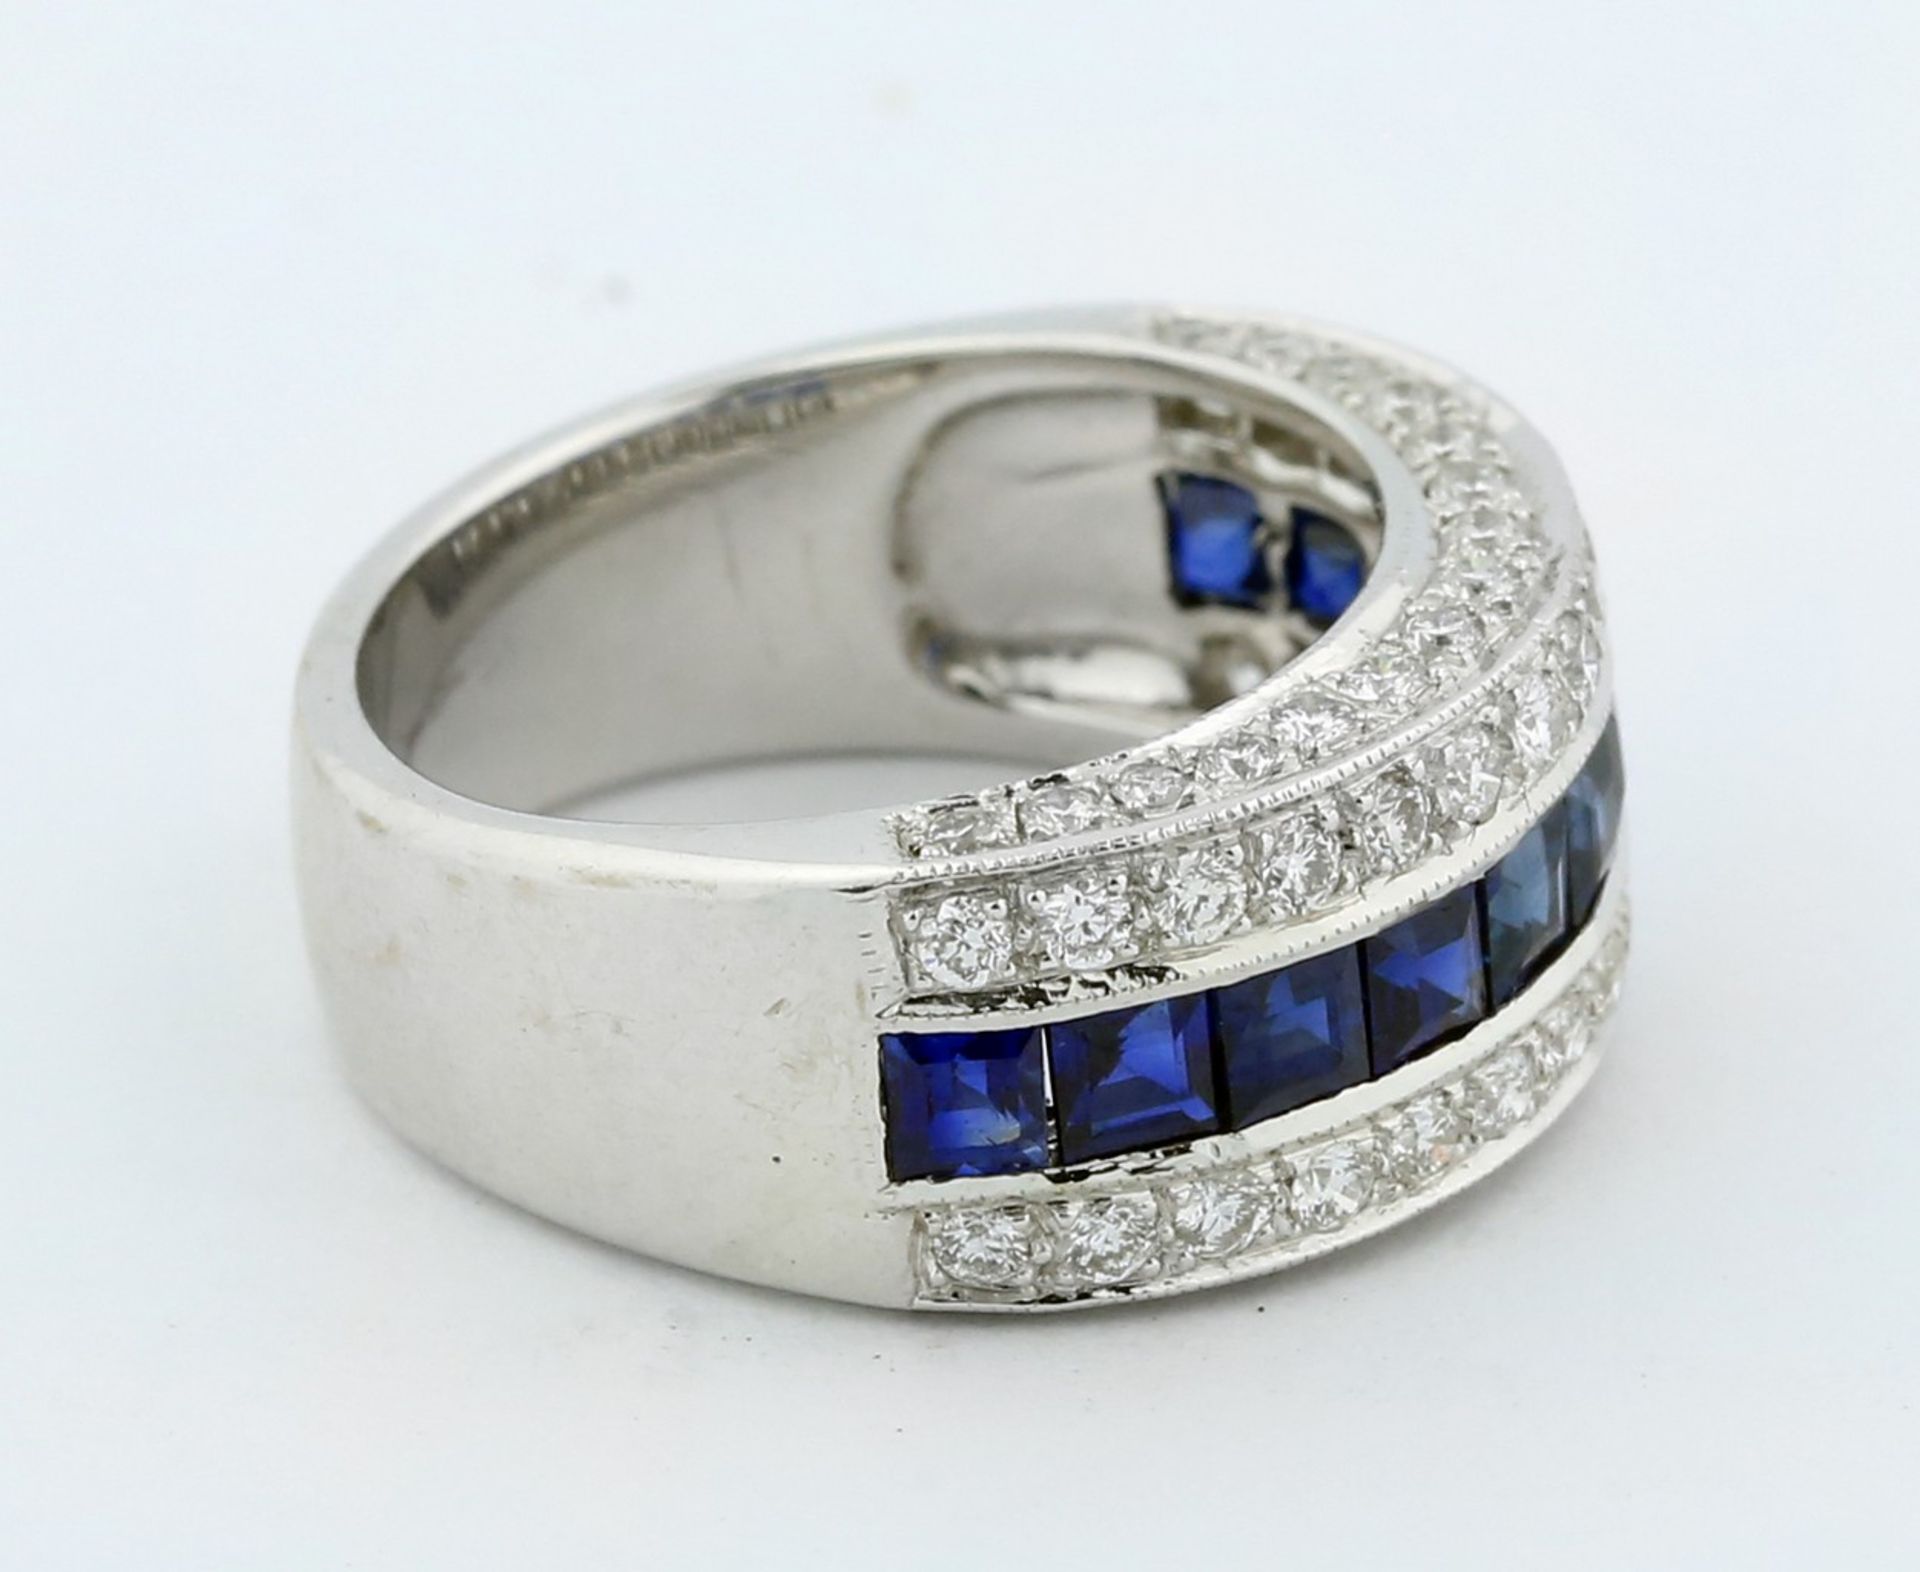 18 KARAT WHITE GOLD SAPPHIRE AND DIAMOND RING The band ring set with calibri-cut sapphires, - Image 2 of 5